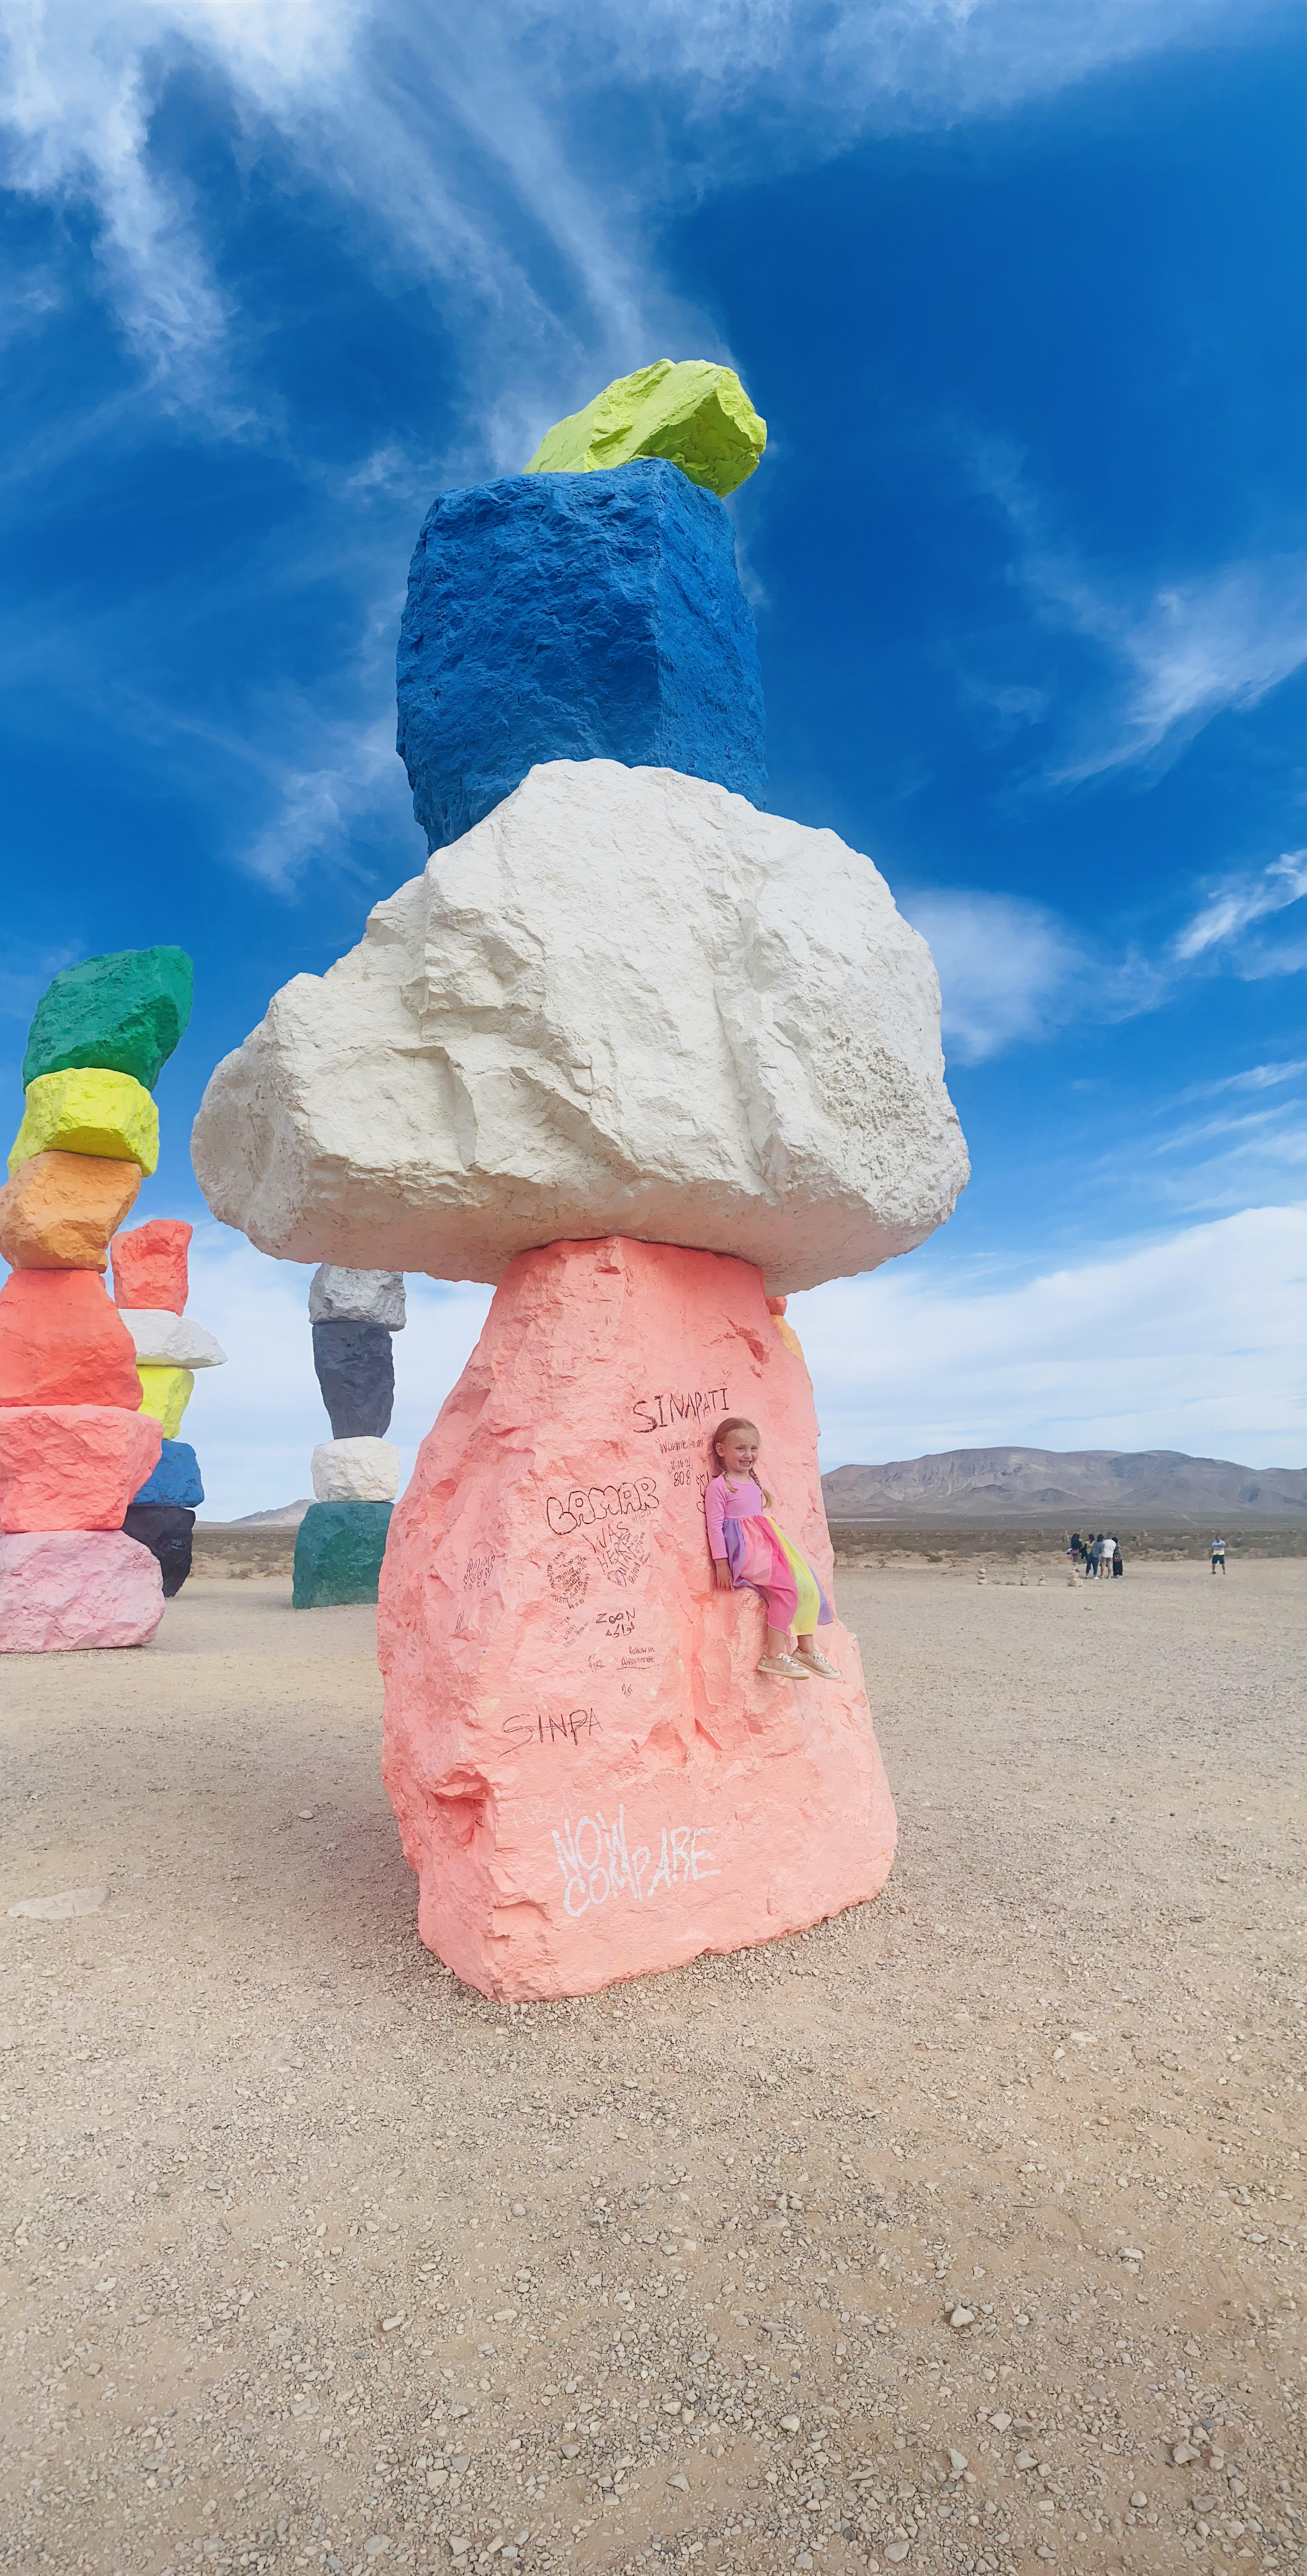 One of the most unique things to do in Las Vegas is visit Seven Magic Mountains. They actually are really cool and make some really cool photos